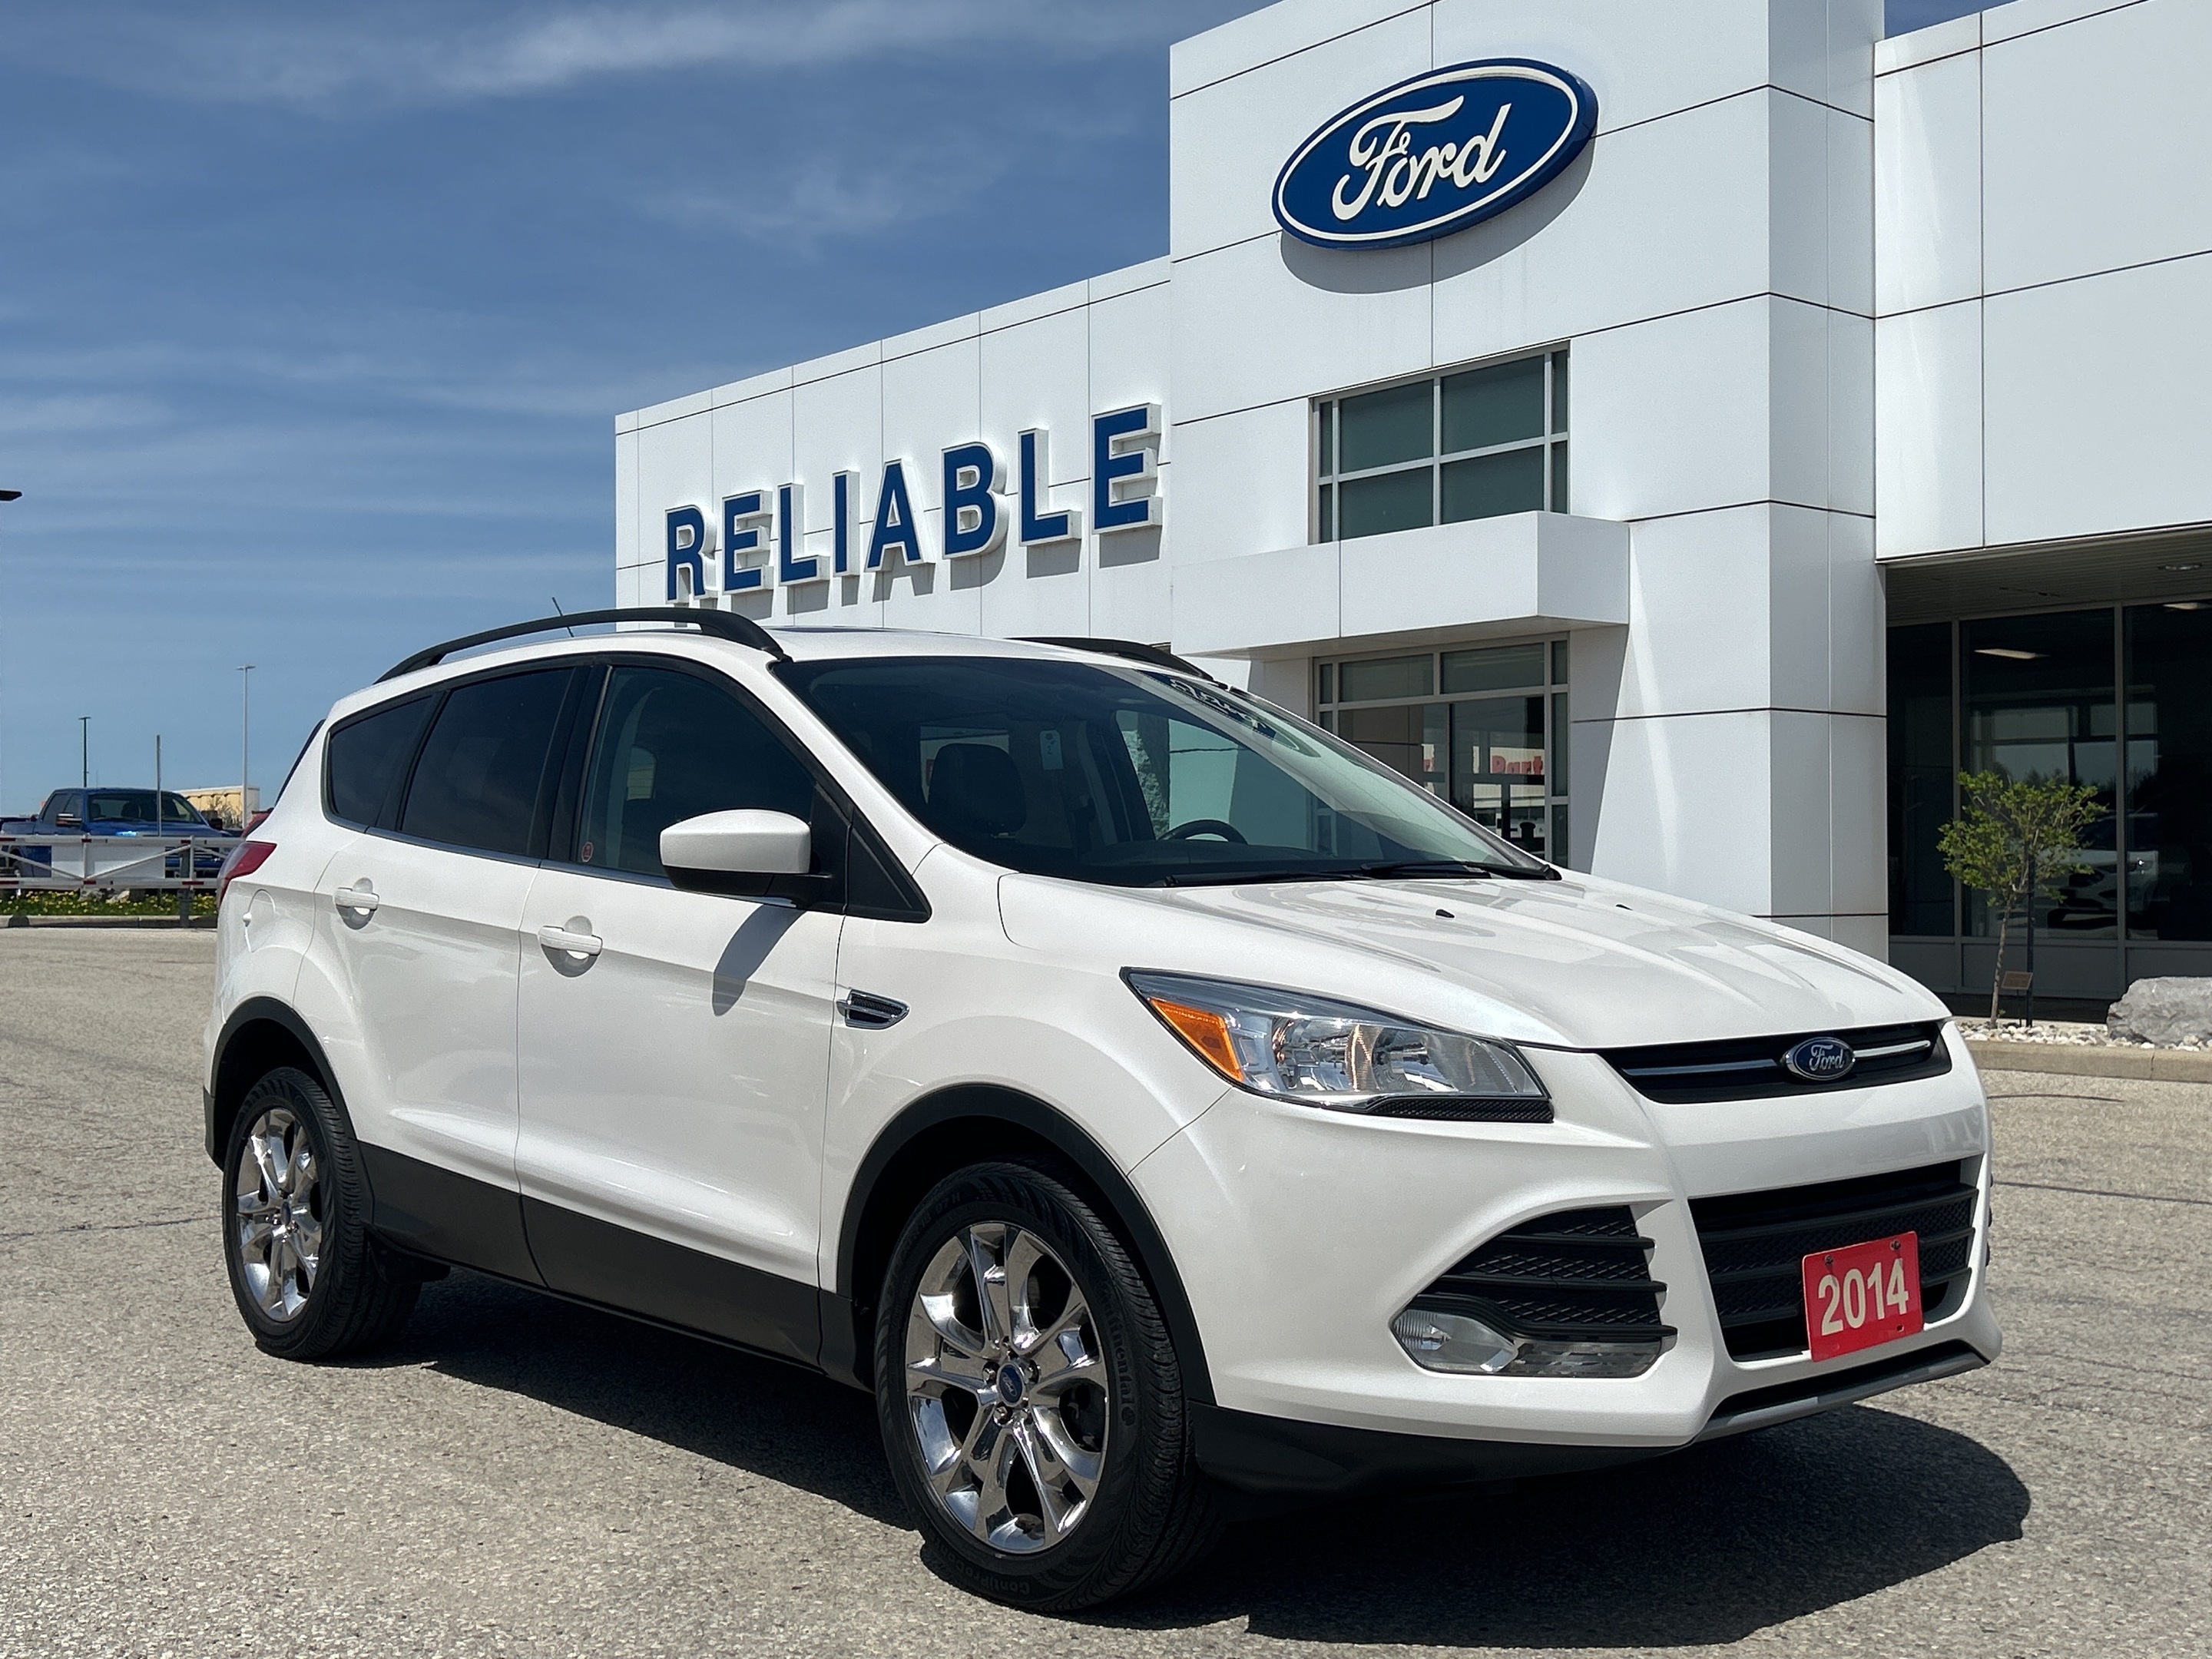 2014 Ford Escape SE   SE 4WD/ Leather Heated Seats/ Navigation/ Pan